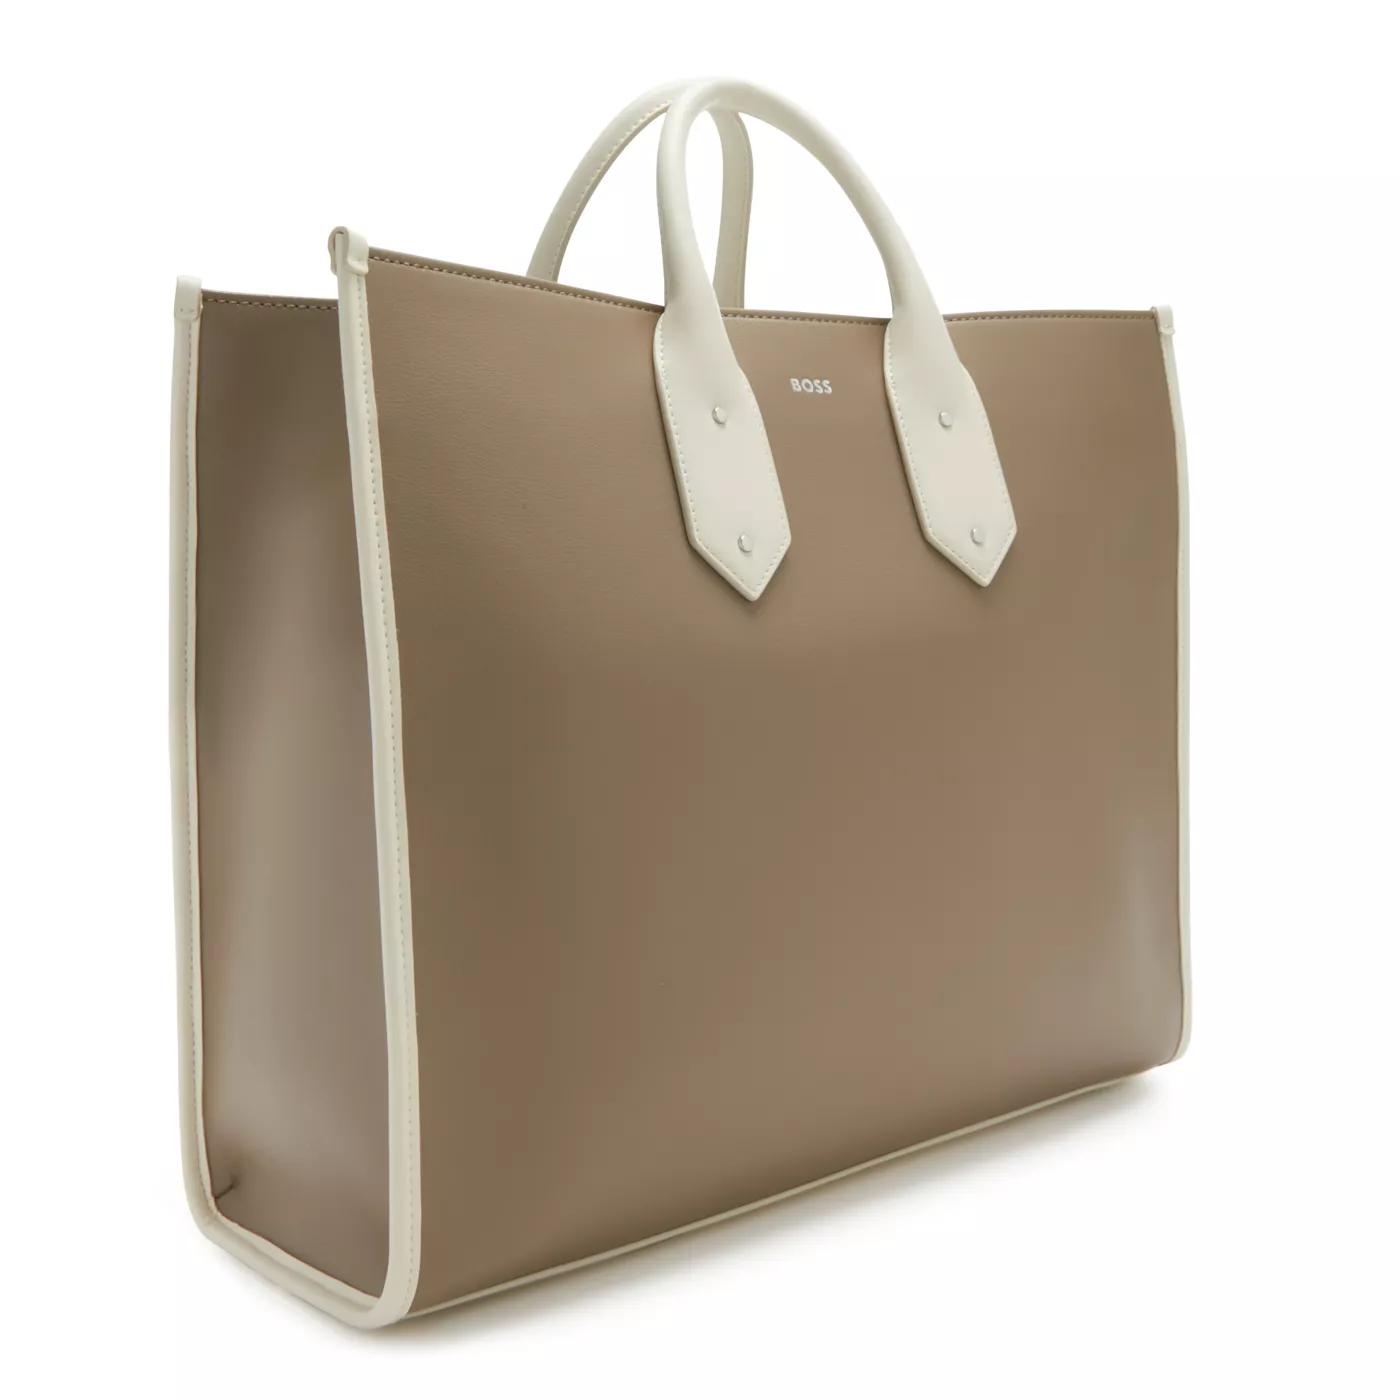 HUGO Shoppers Boss Sandy Taupe Shopper 50504183-267 in taupe